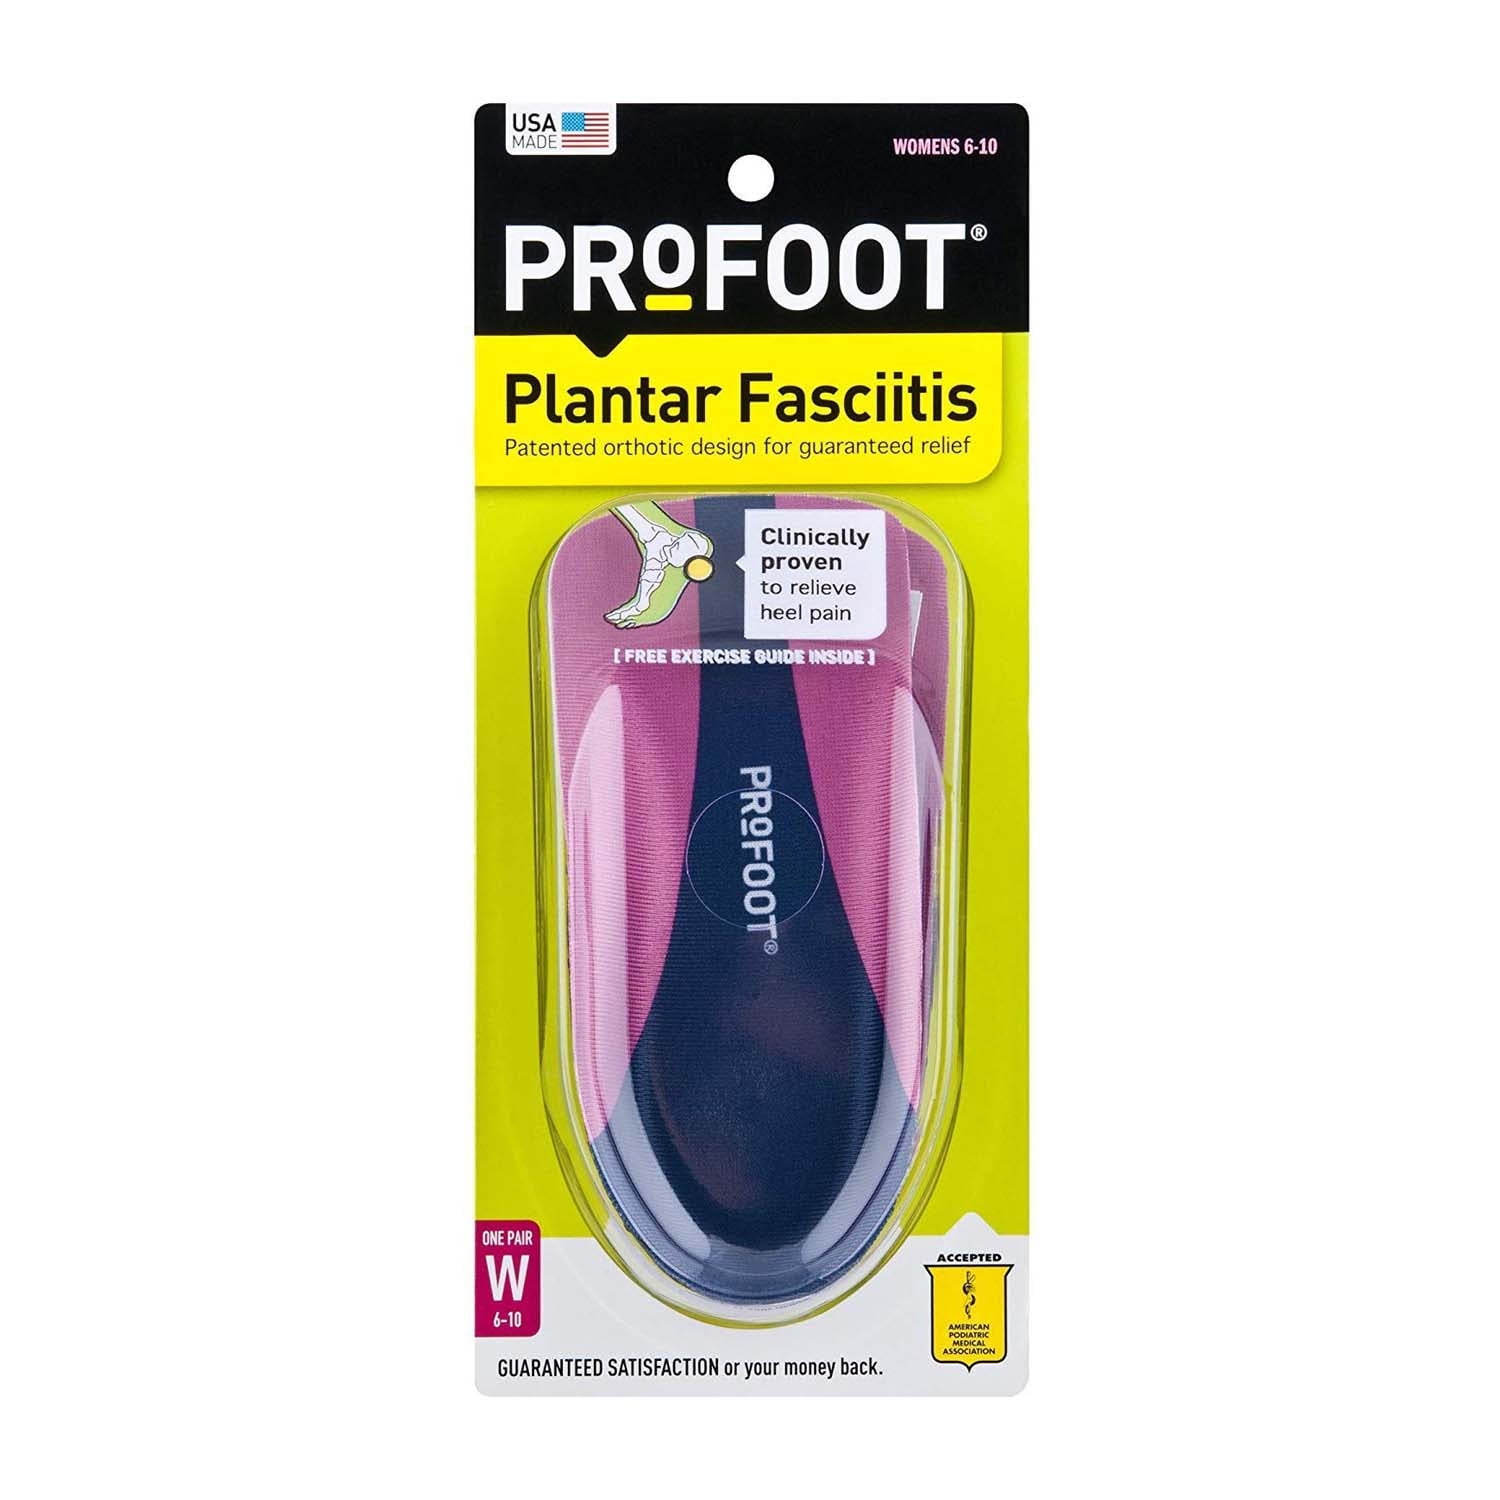 Profoot Plantar Fasciitis Insoles For Women Size 6 to 10 1 Pair